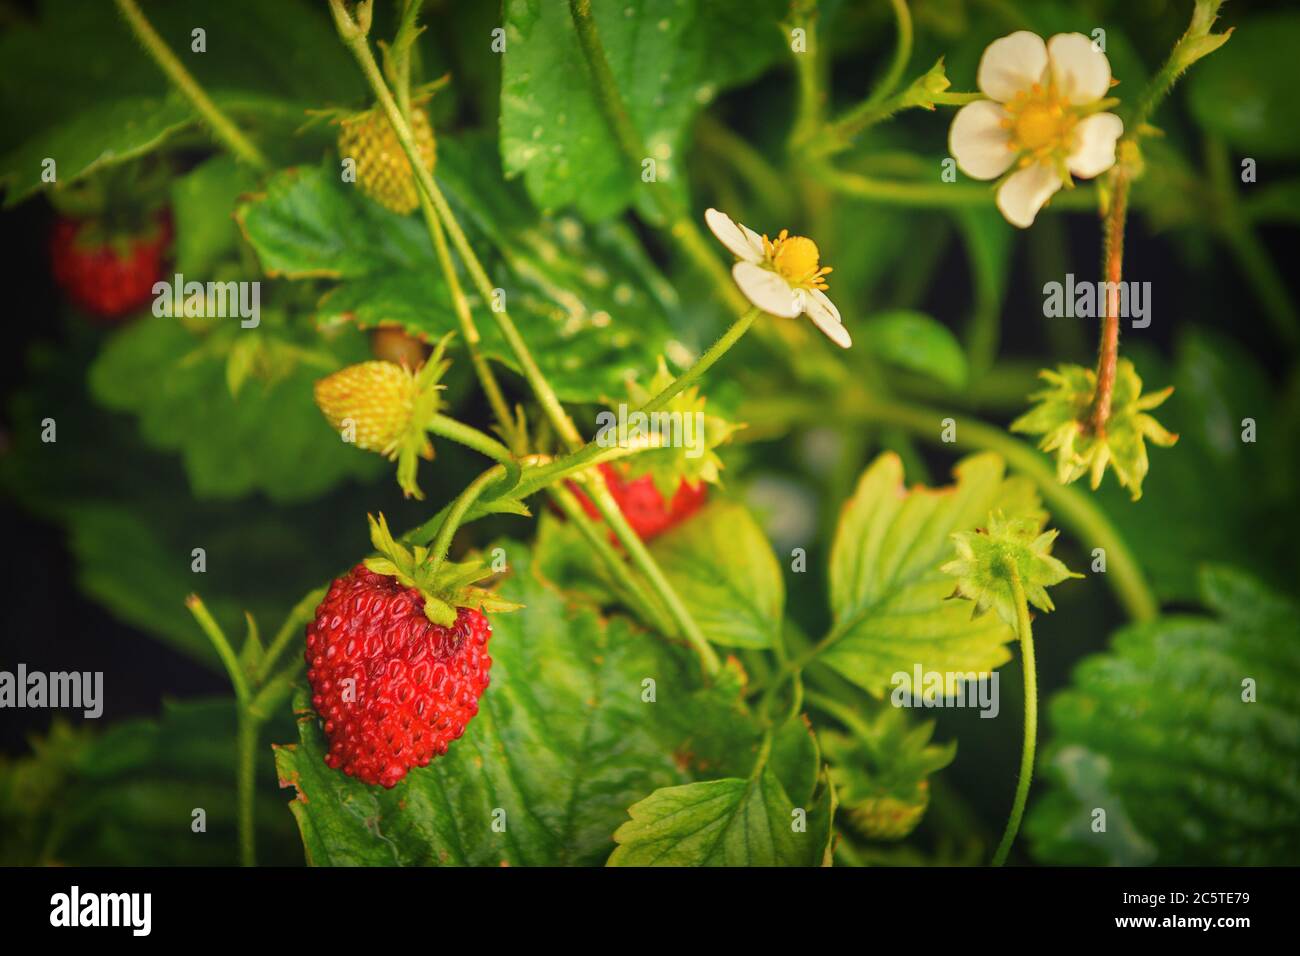 Blooming strawberry with red berries and green foliage, close-up. Stock Photo